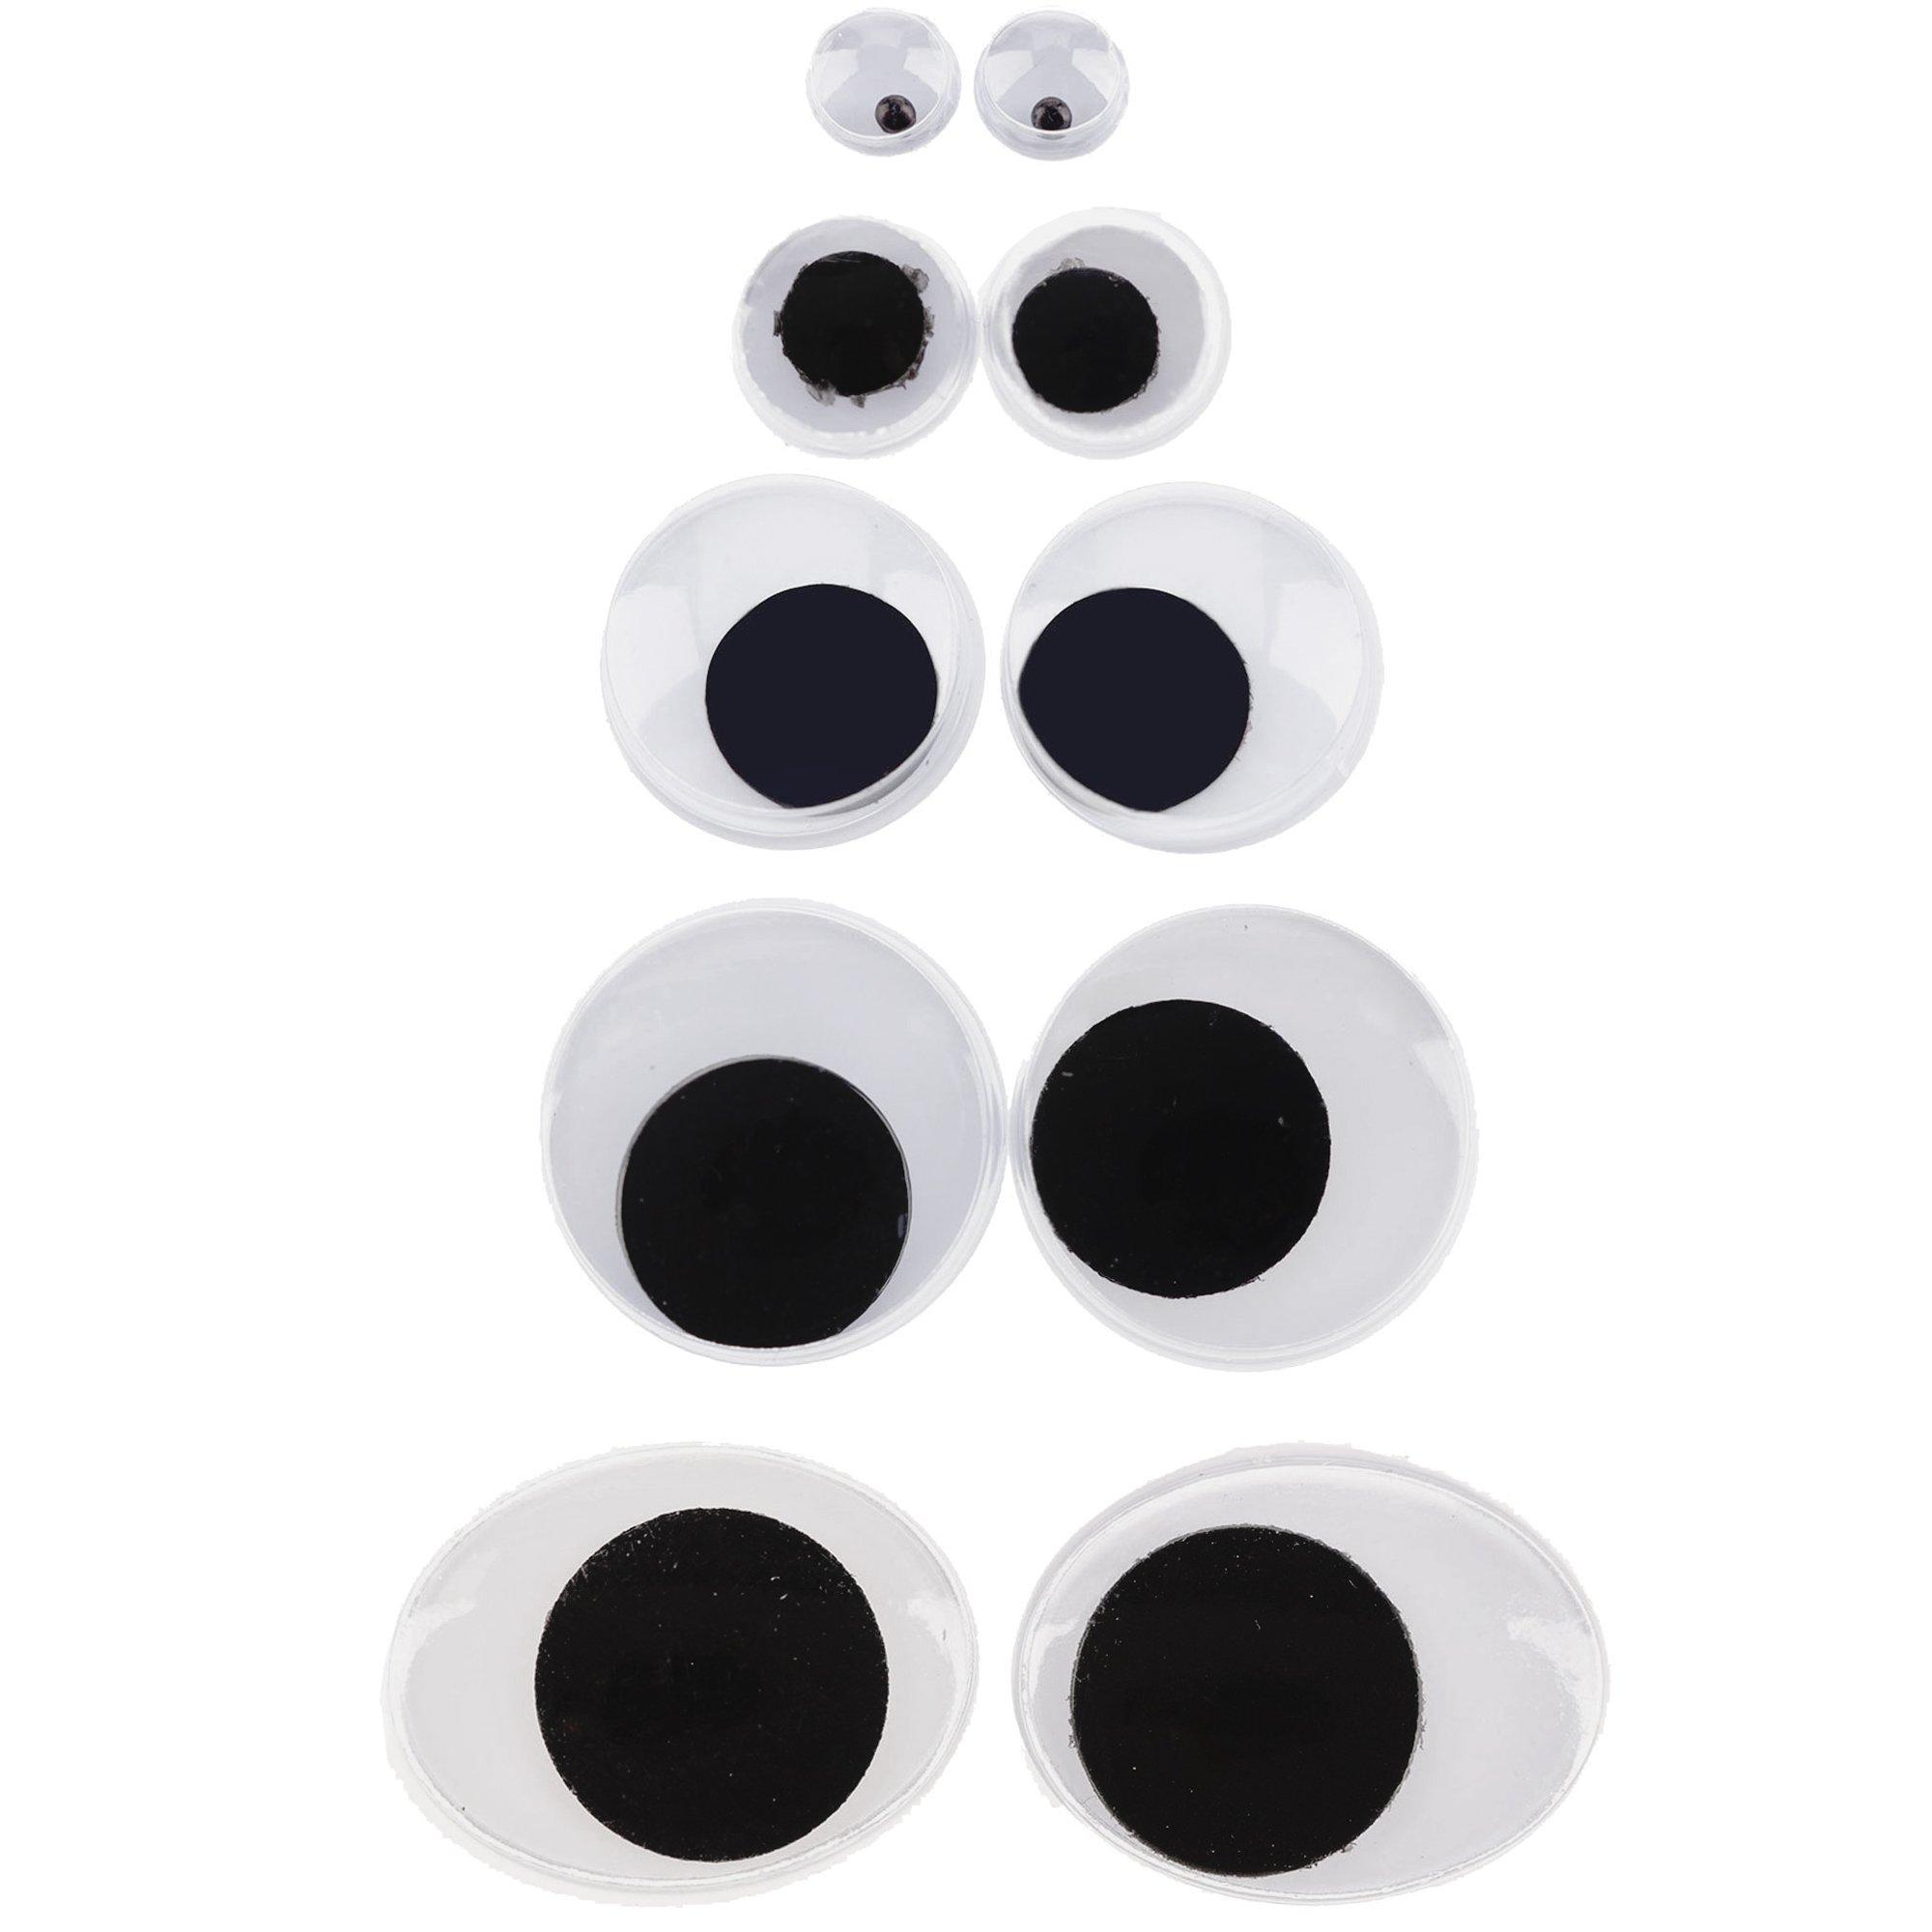 Googly Eyes Wiggle Eyes Isolated On Black And White Display Stock